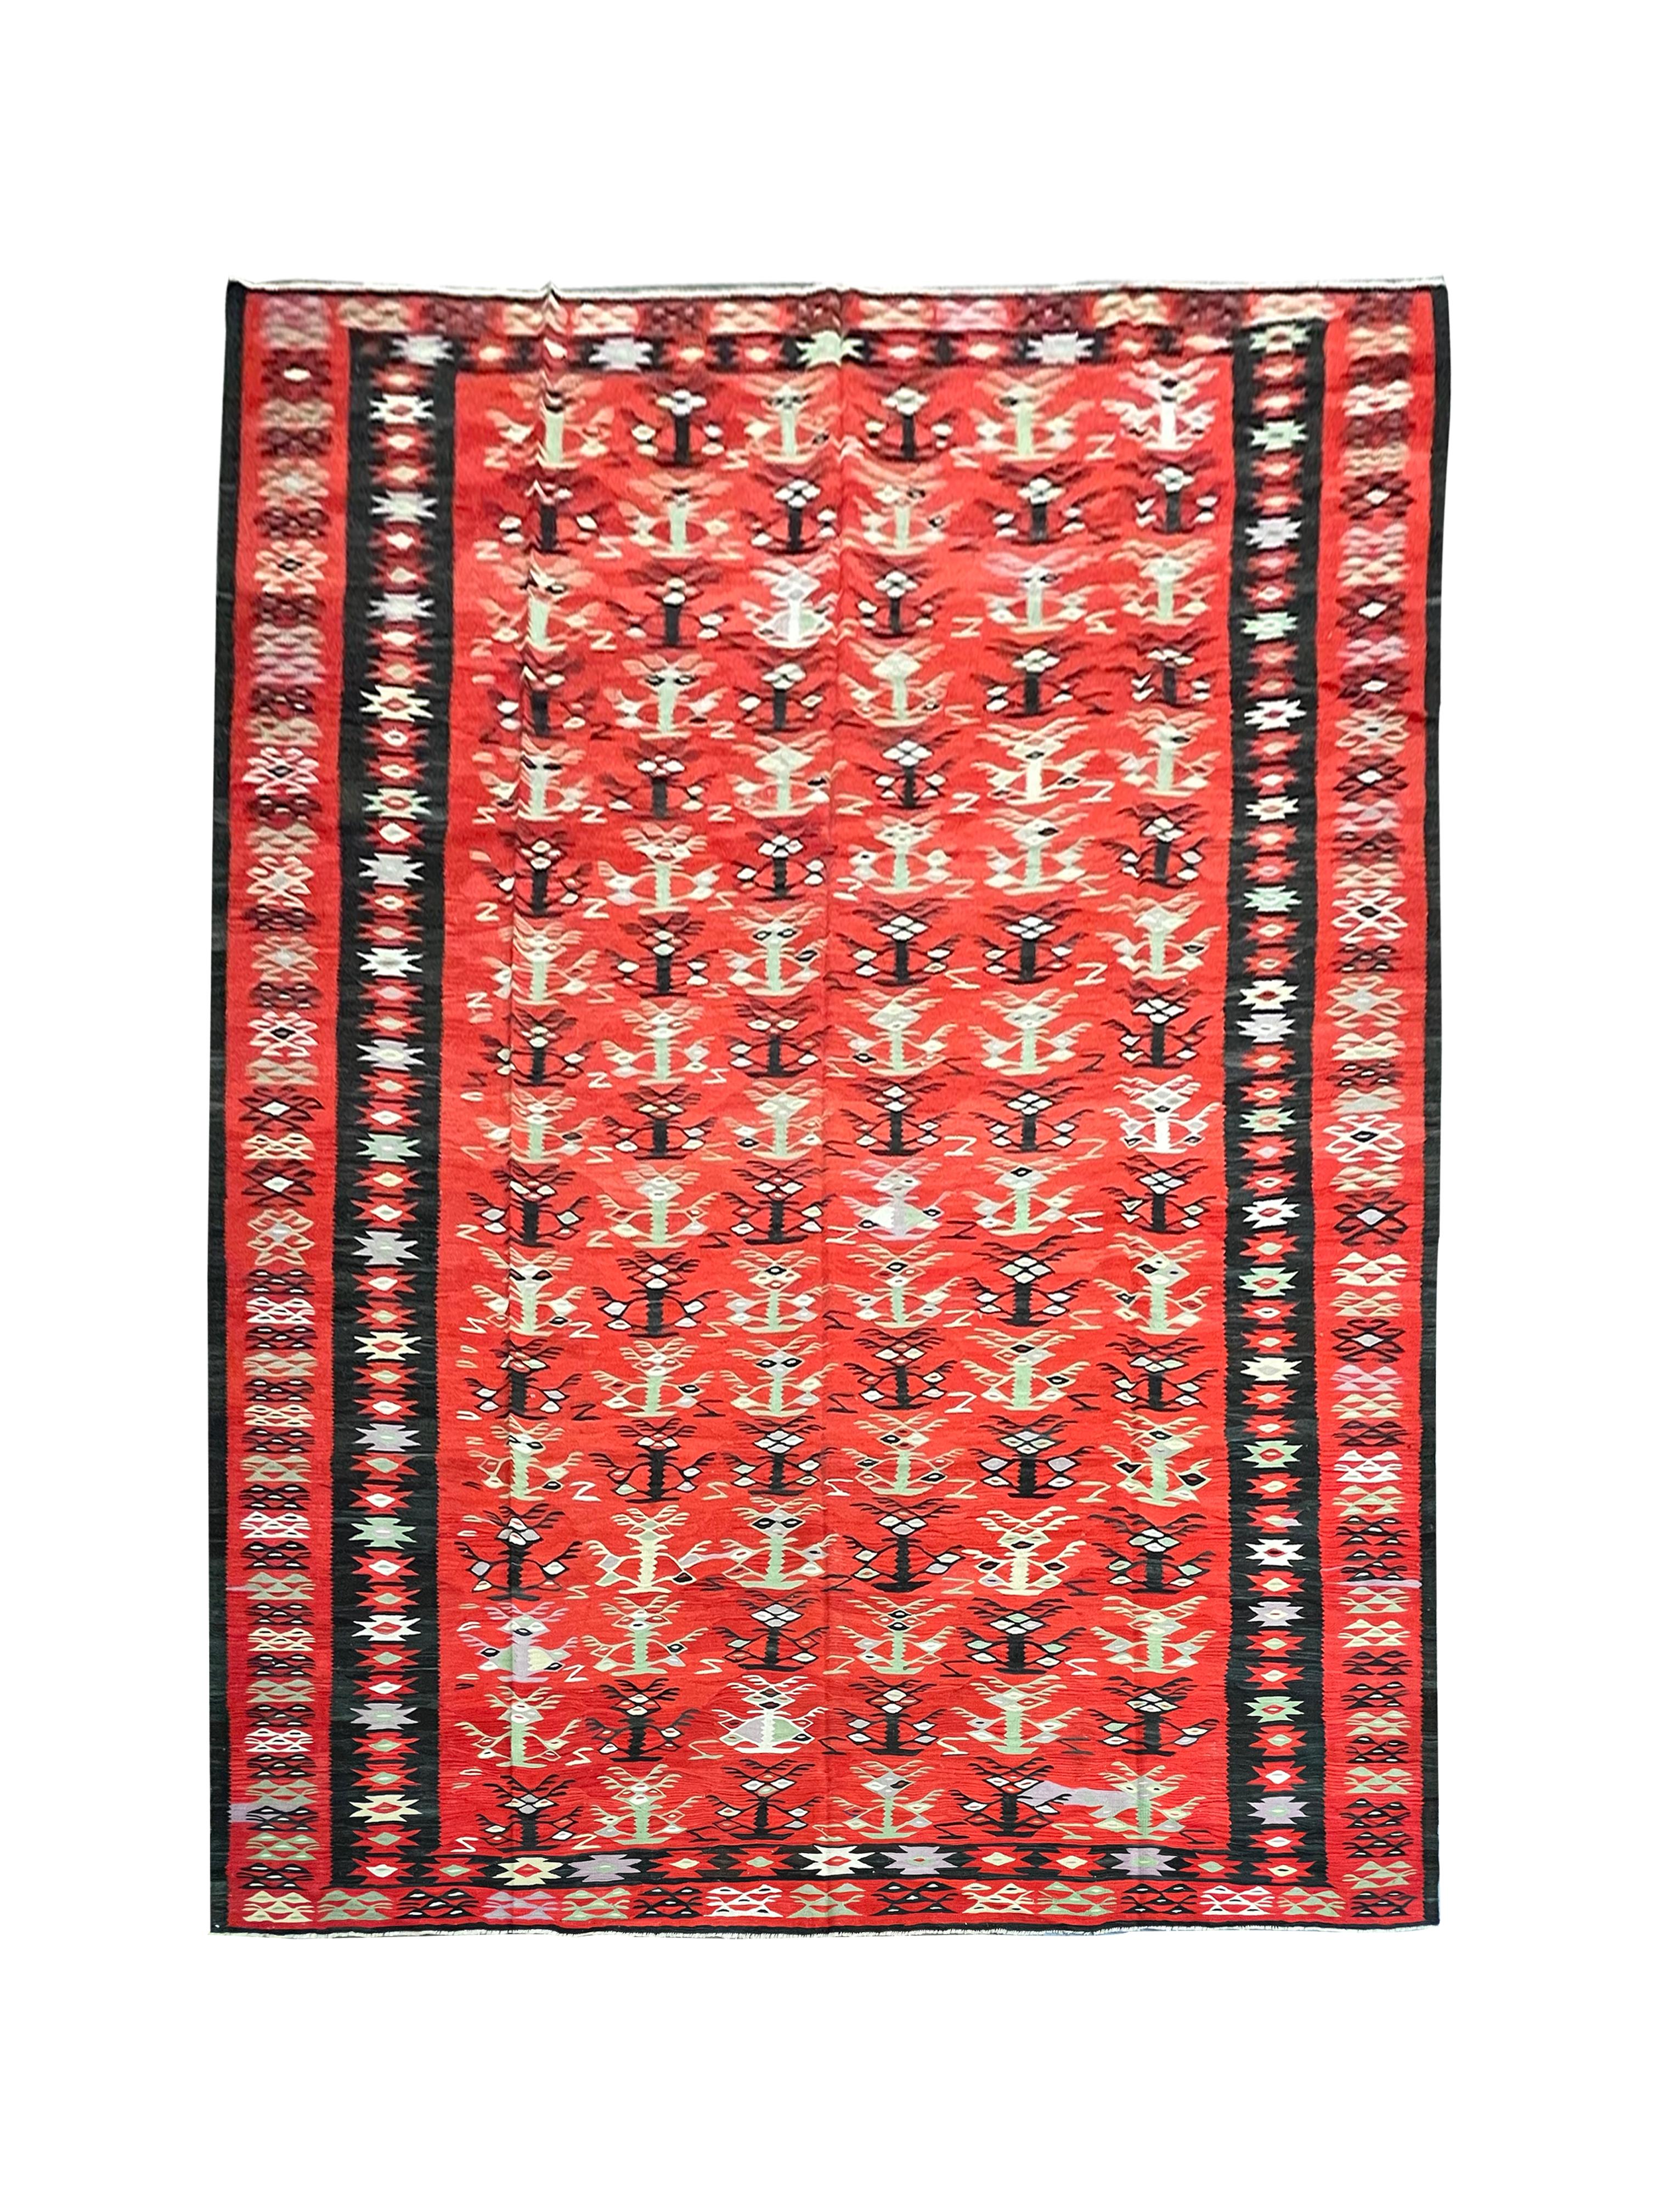 Country Large Antique Anatolian Kilim Rug Handmade Flatwoven Red Wool Area Rug For Sale